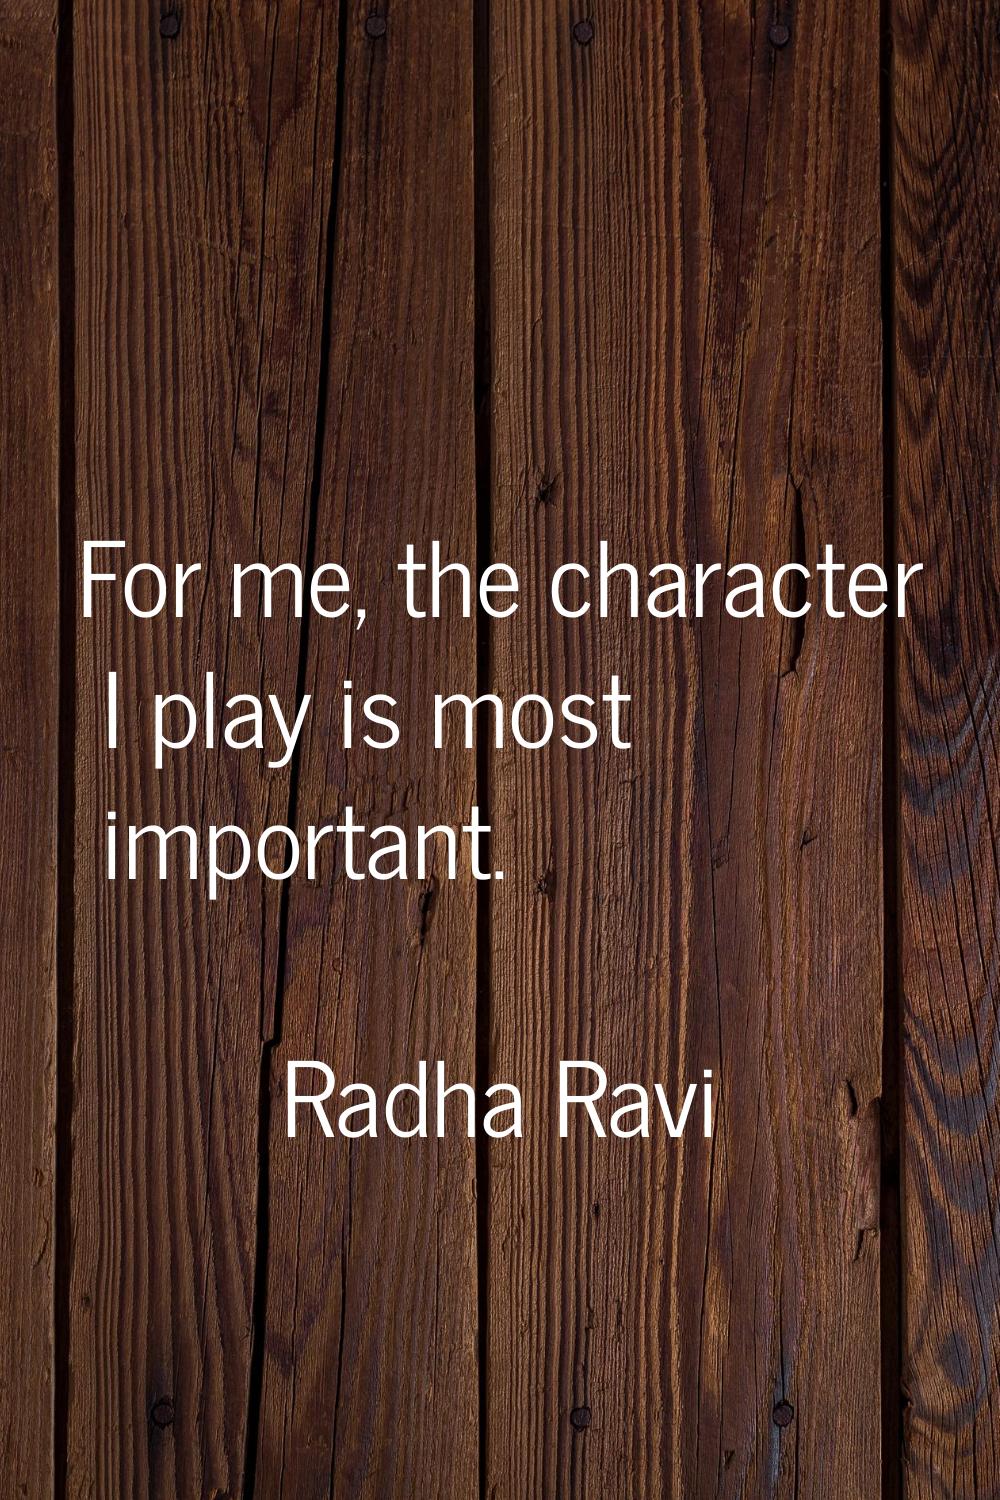 For me, the character I play is most important.